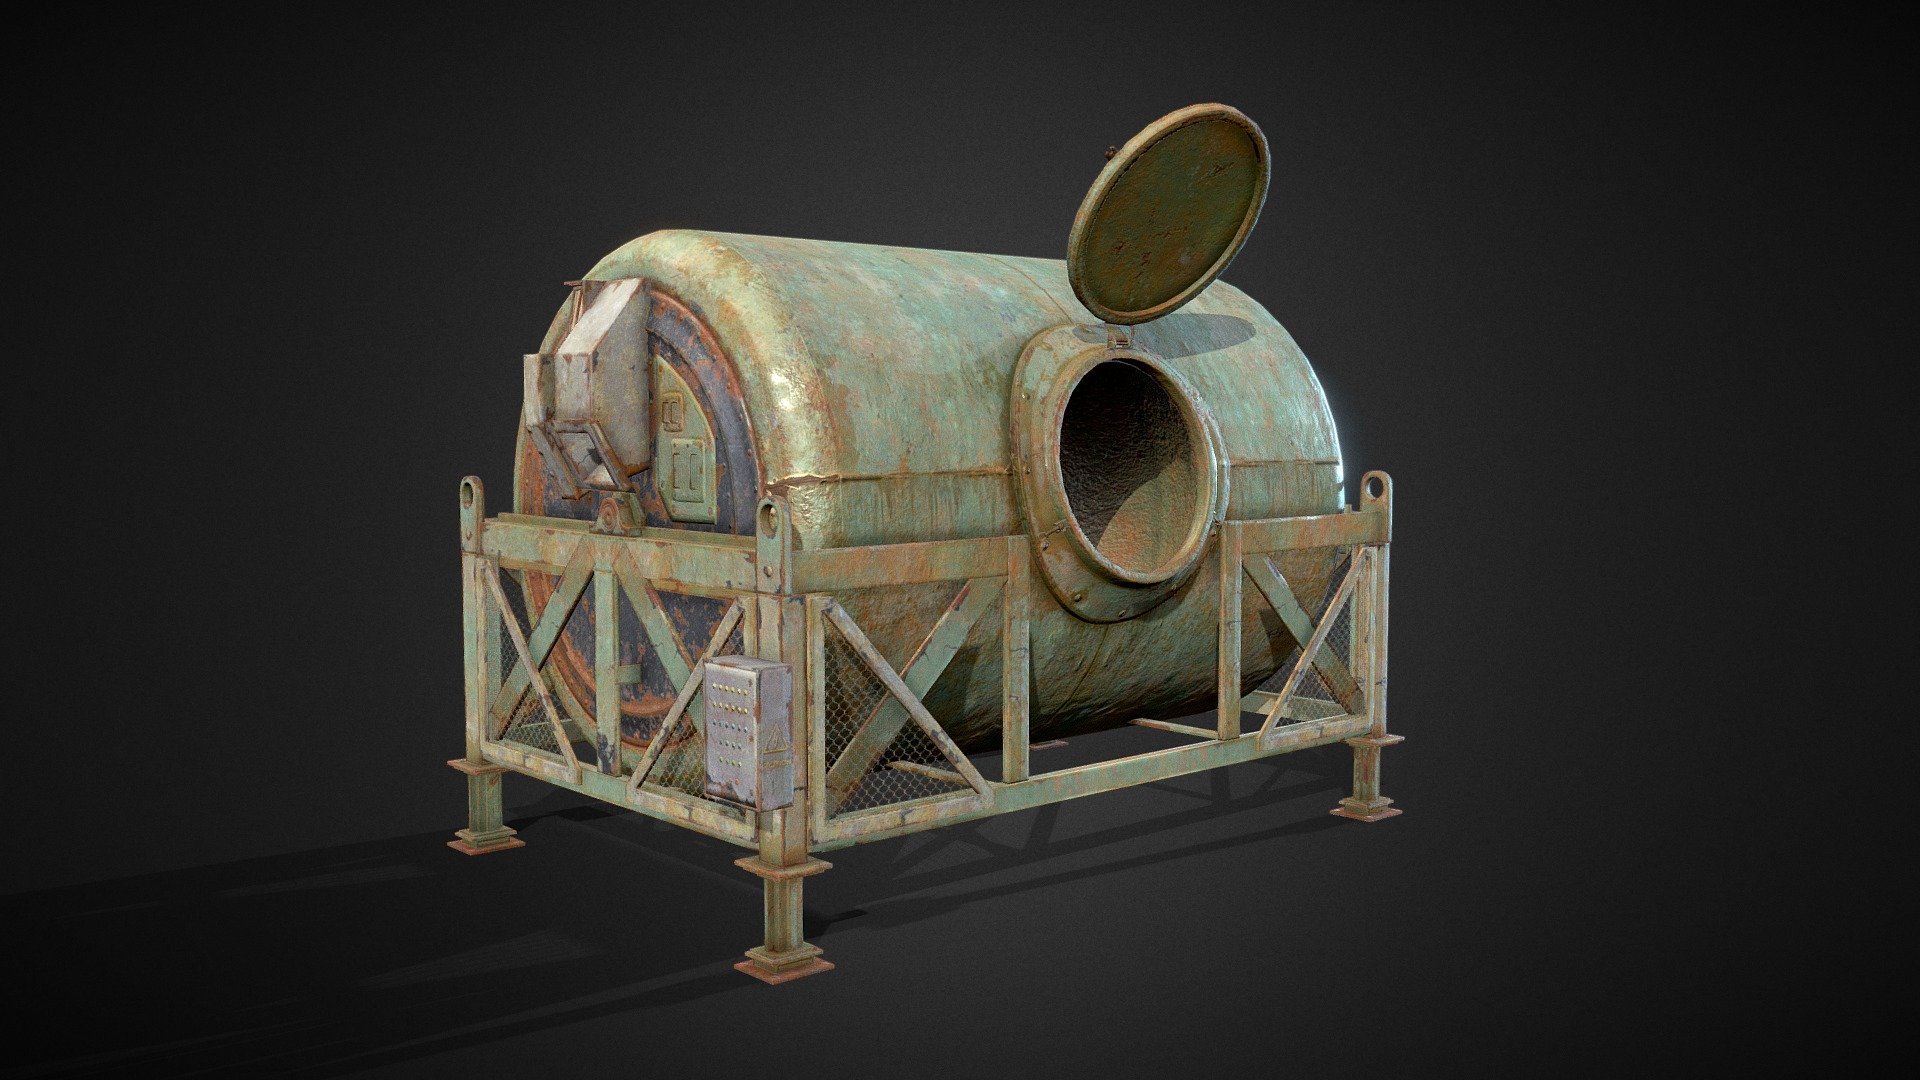 Recycling Rounded Dumpster, This asset was used in my Game Art Unreal project &ldquo;Alligator Farm